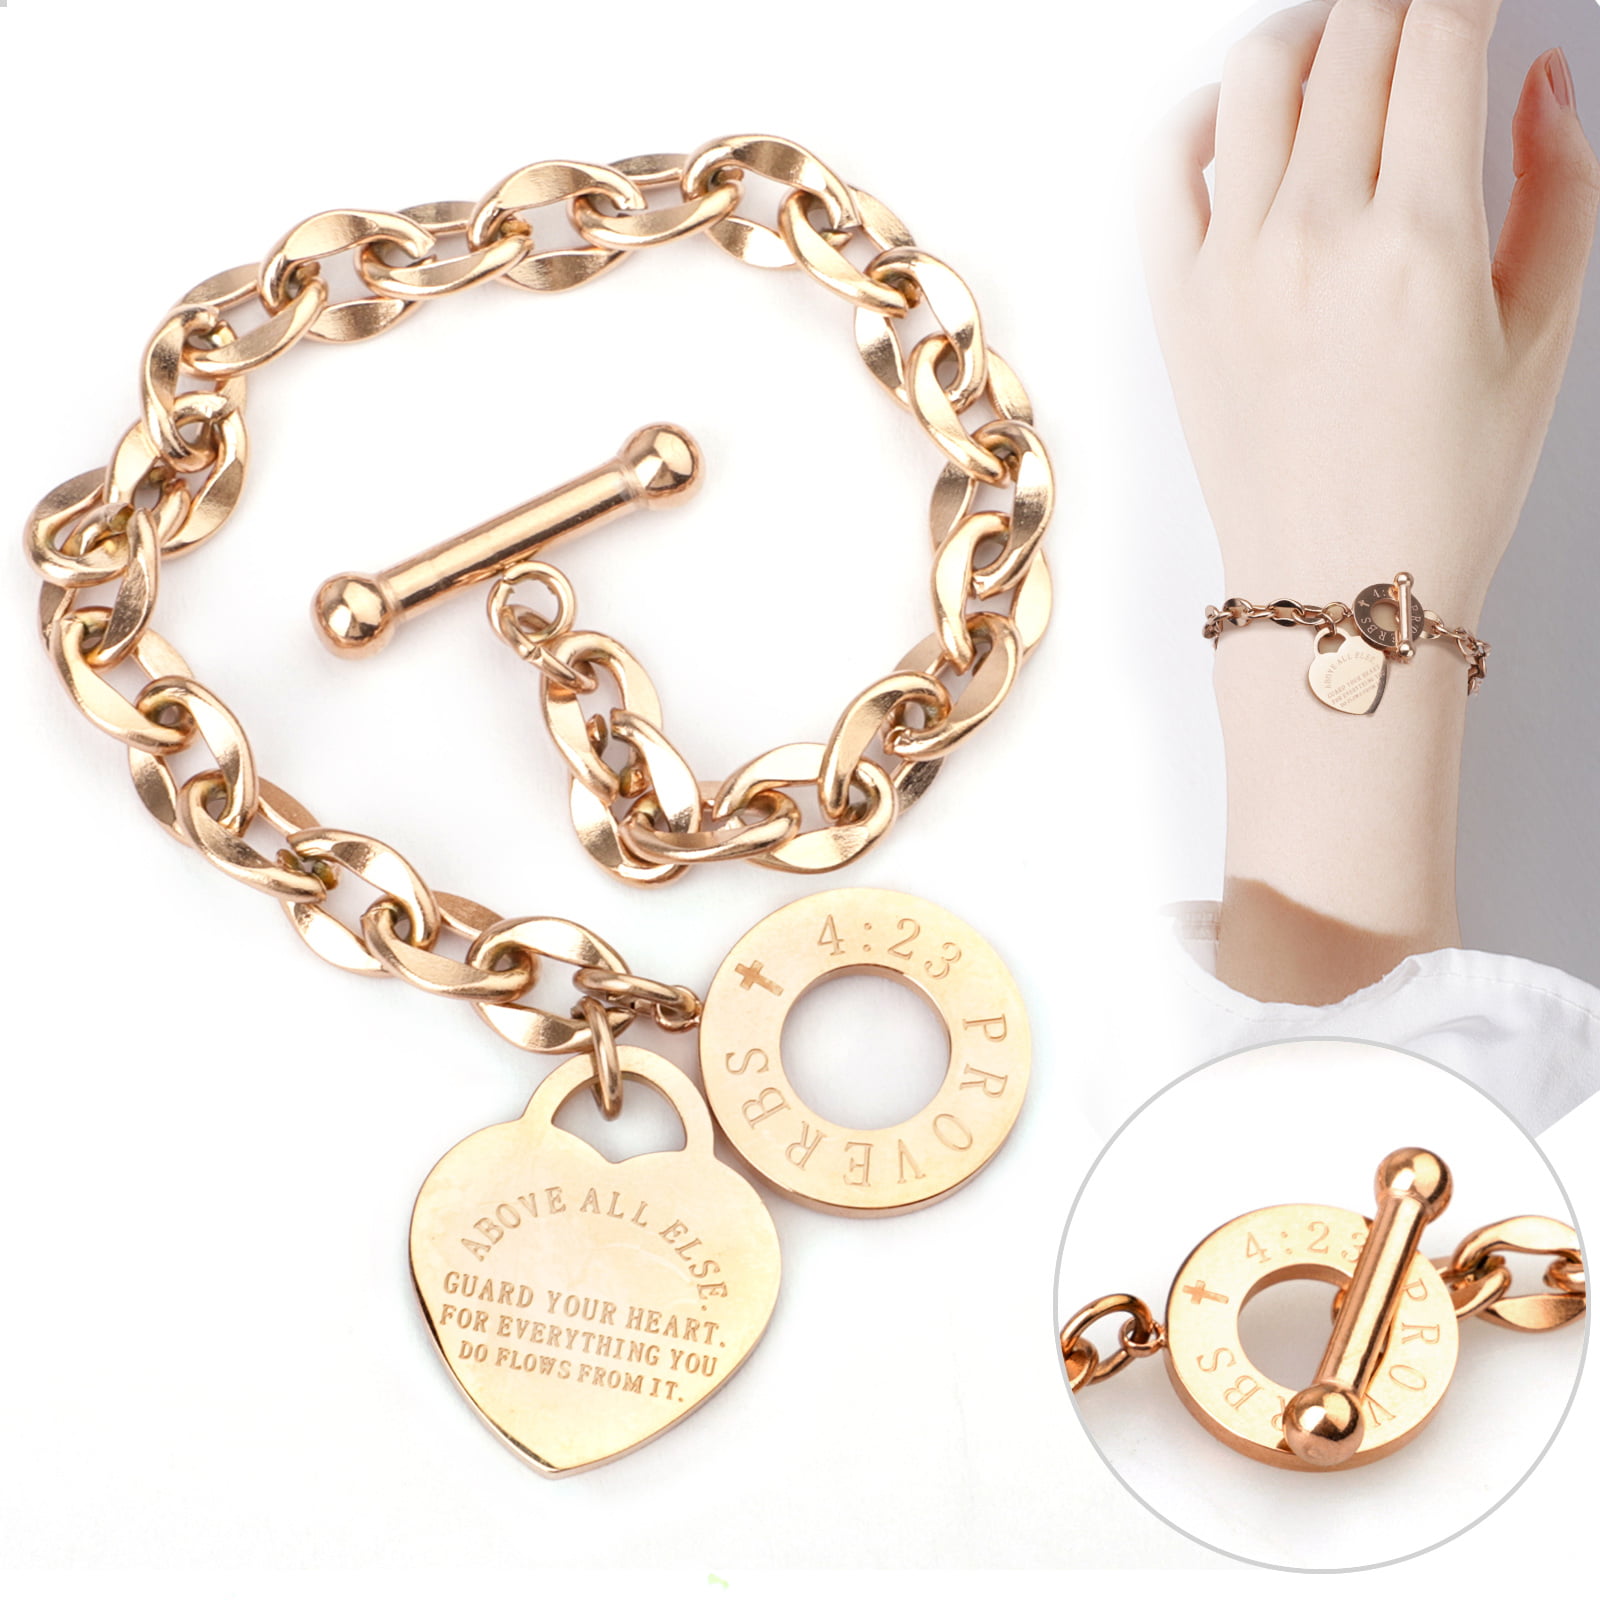 GiftJewelryShop Gold Plated Heart Quilt Bracelet Link Photo Italian Charms 